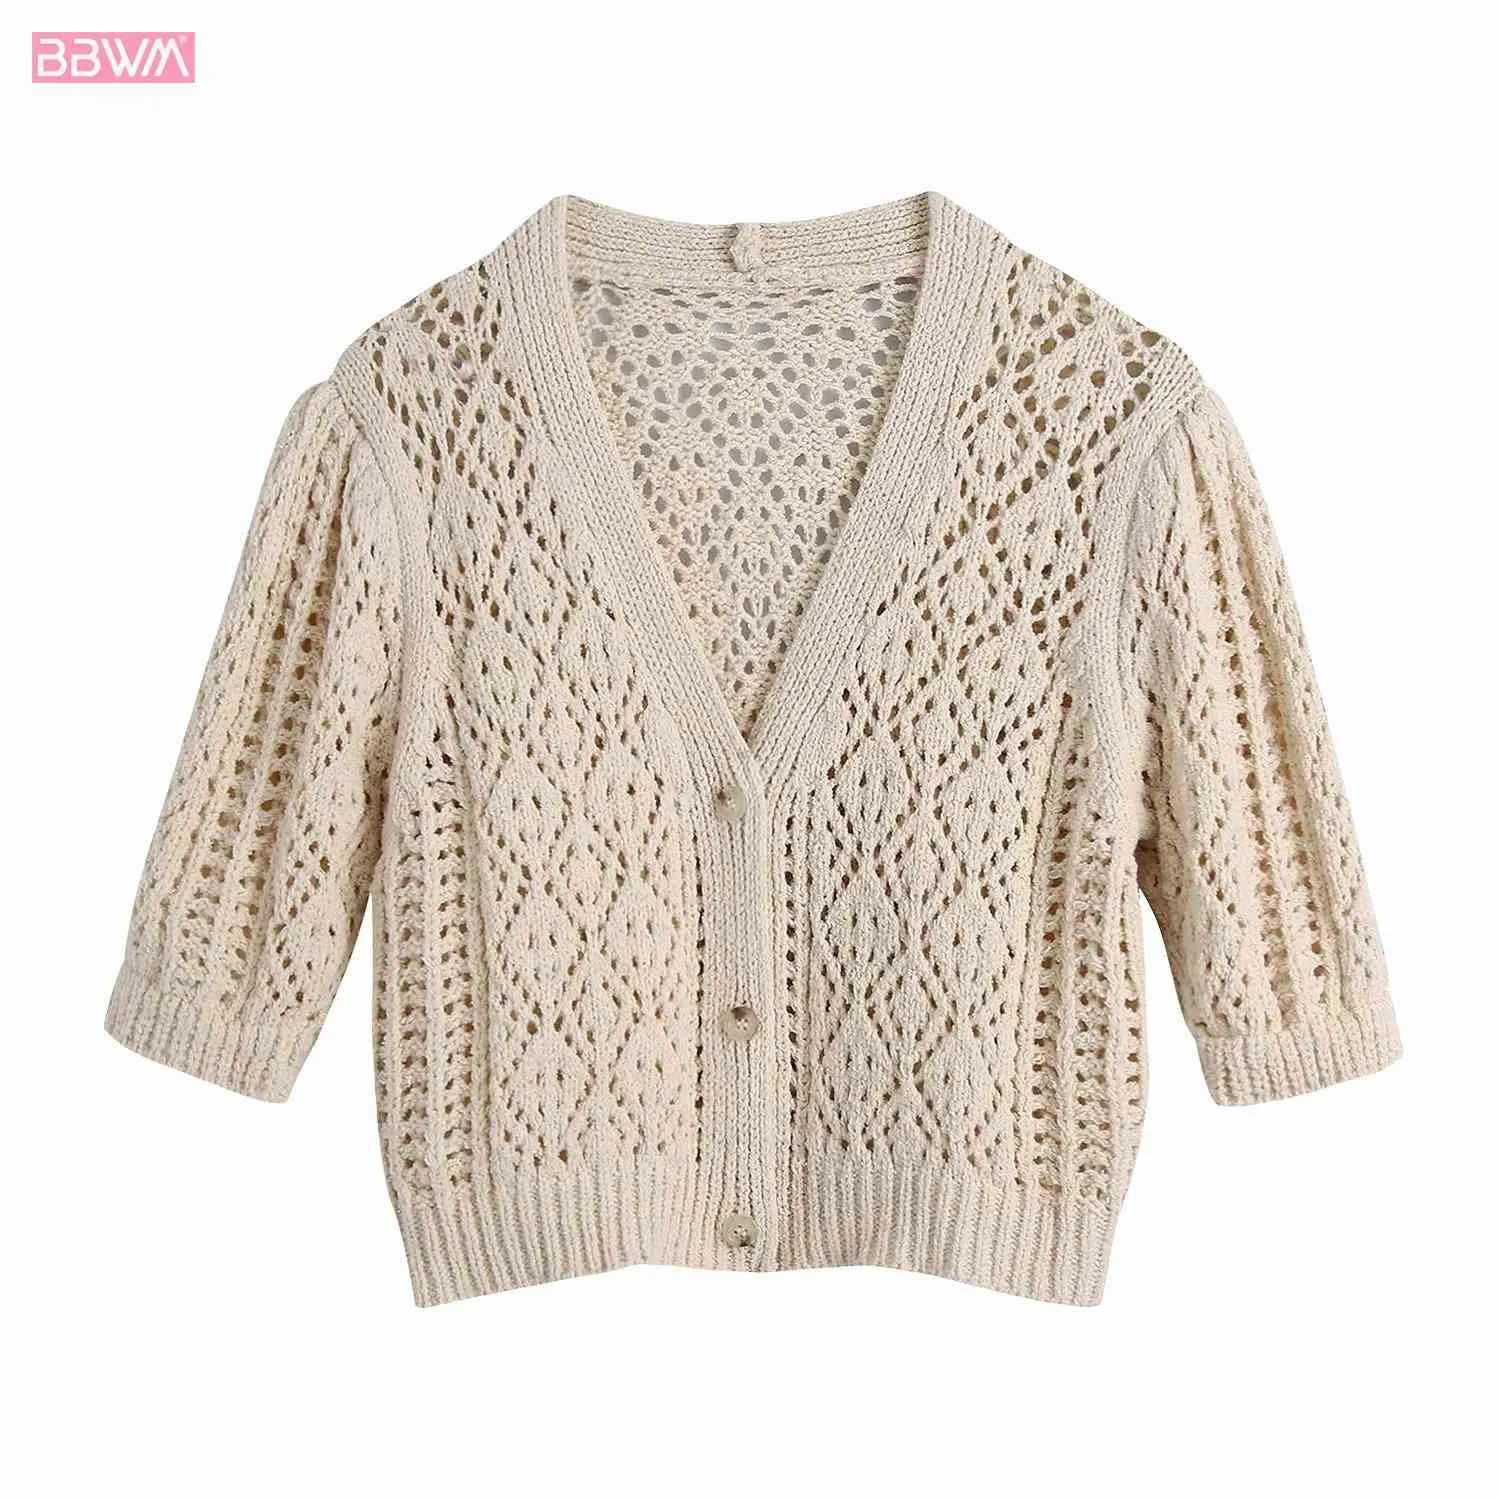 Vintage Women Neck Three-Quarter Rękawy Openwork Sweter Cardigan Fashion Solid Color Single Breasted Chic Kobiet Topy 210507